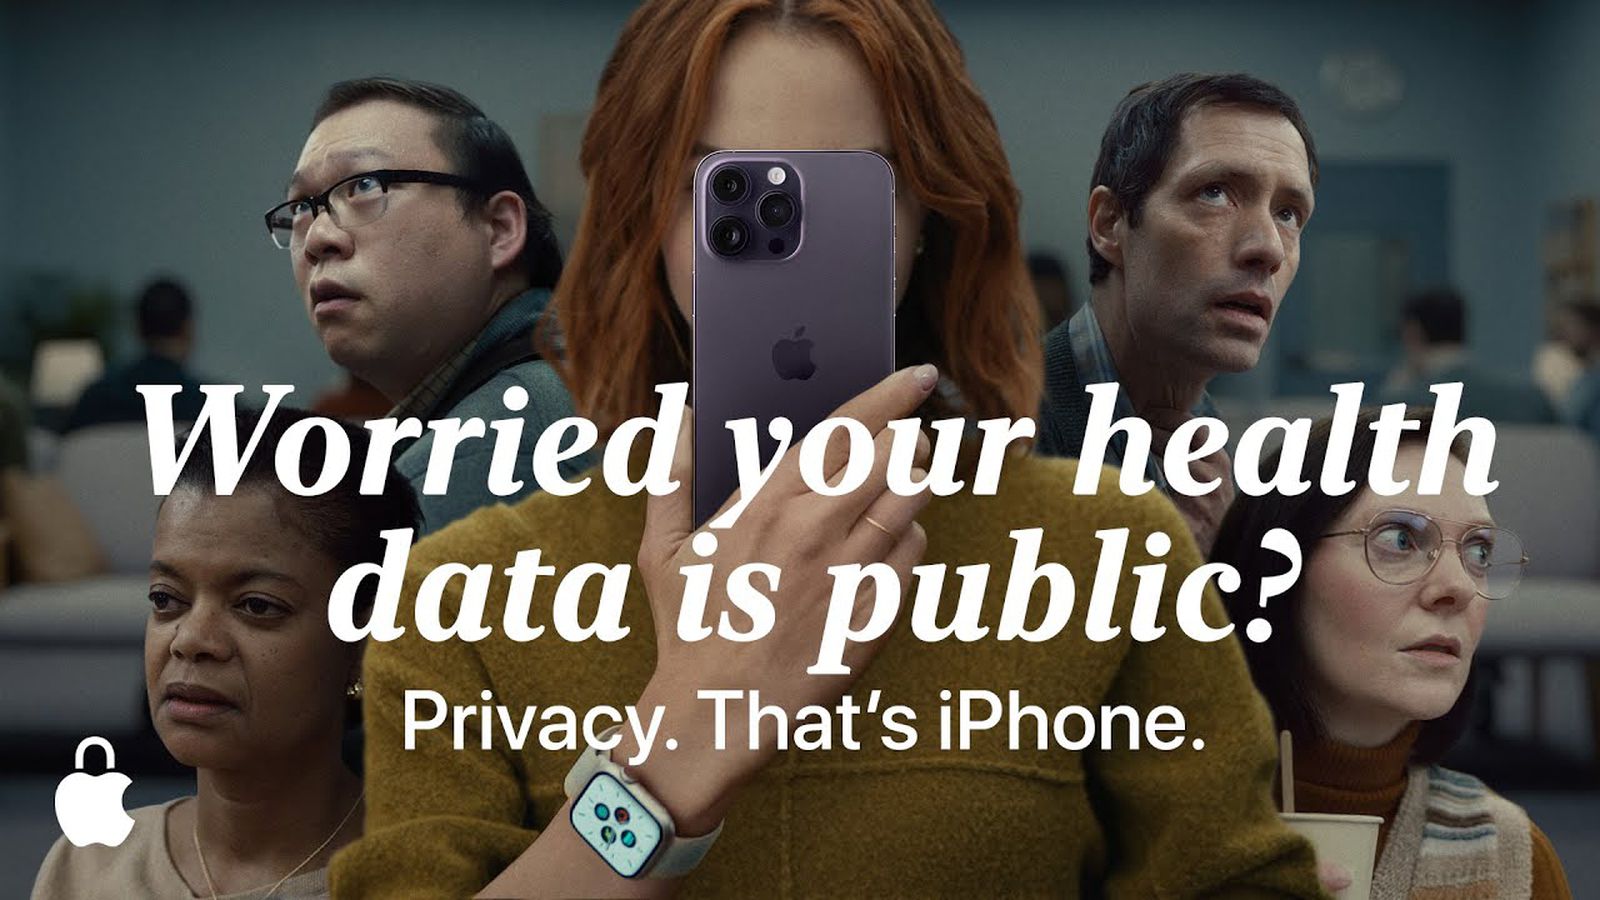 Apple’s Latest Ad Campaign Takes a Humorous Look at Health Data Privacy